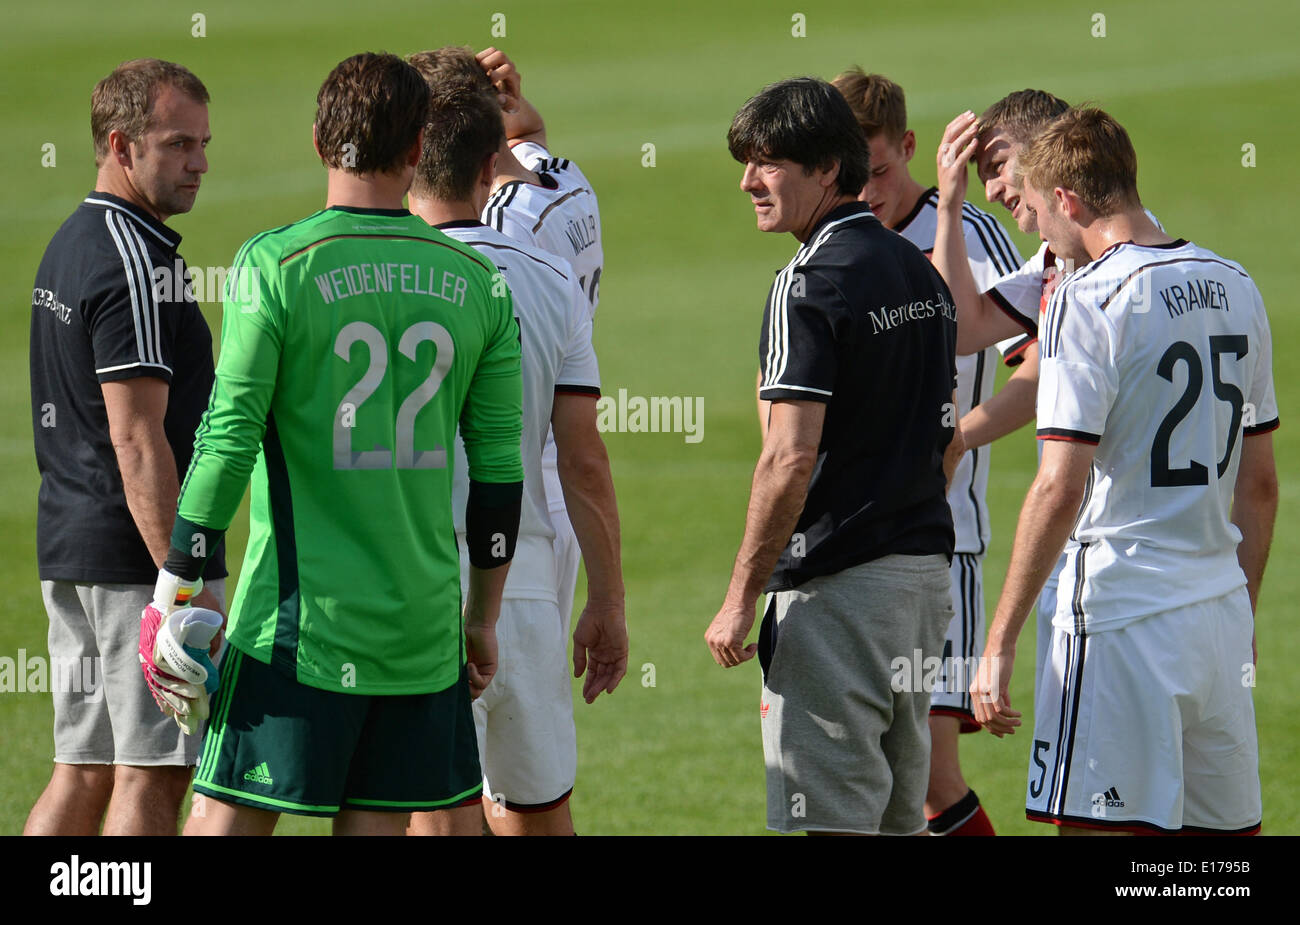 Passeier, Italy. 25th May, 2014. Assistant coach Hansi Flick (L) and head coach Joachim Loew (4- R) of the German national soccer team talk to the players Goalkeeper Roman Weidenfeller (2-L) and Christoph Kramer (R) during a break of a friendly match against the German U20 team on a training ground at St. Leonhard in Passeier, Italy, 25 May 2014. Germany's national soccer squad prepares for the upcoming FIFA World Cup 2014 in Brazil at a training camp in South Tyrol until 30 May 2014. Photo: Andreas Gebert/dpa/Alamy Live News Stock Photo